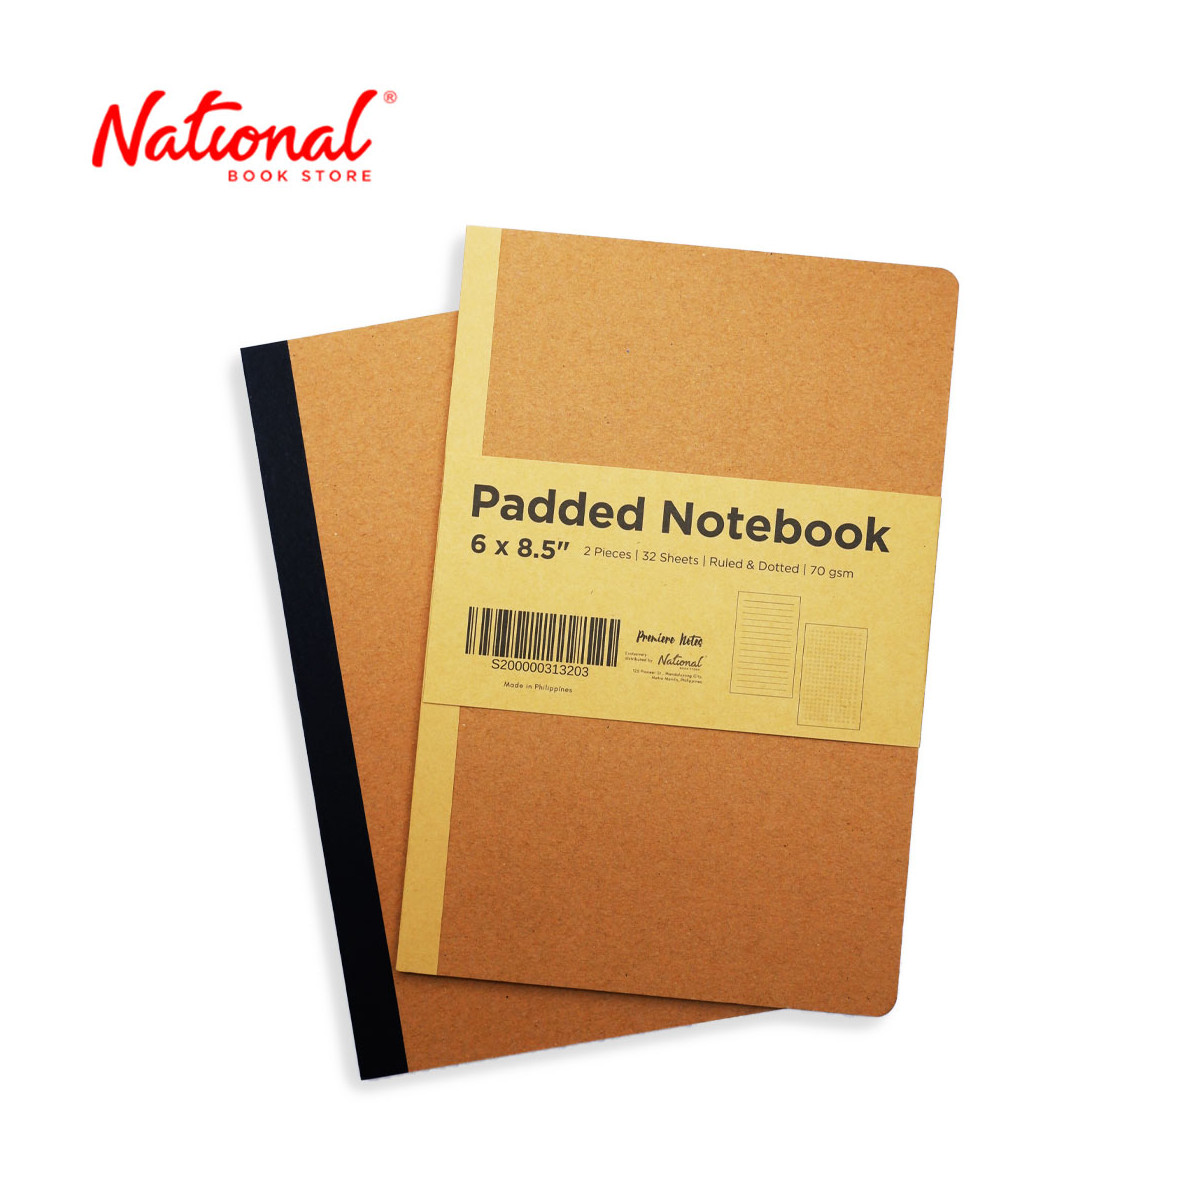 Premiere Notes Kraft Padded Notebooks 6x8.5 inches - 2 Pieces 32Sheets - Ruled, Dotted - School